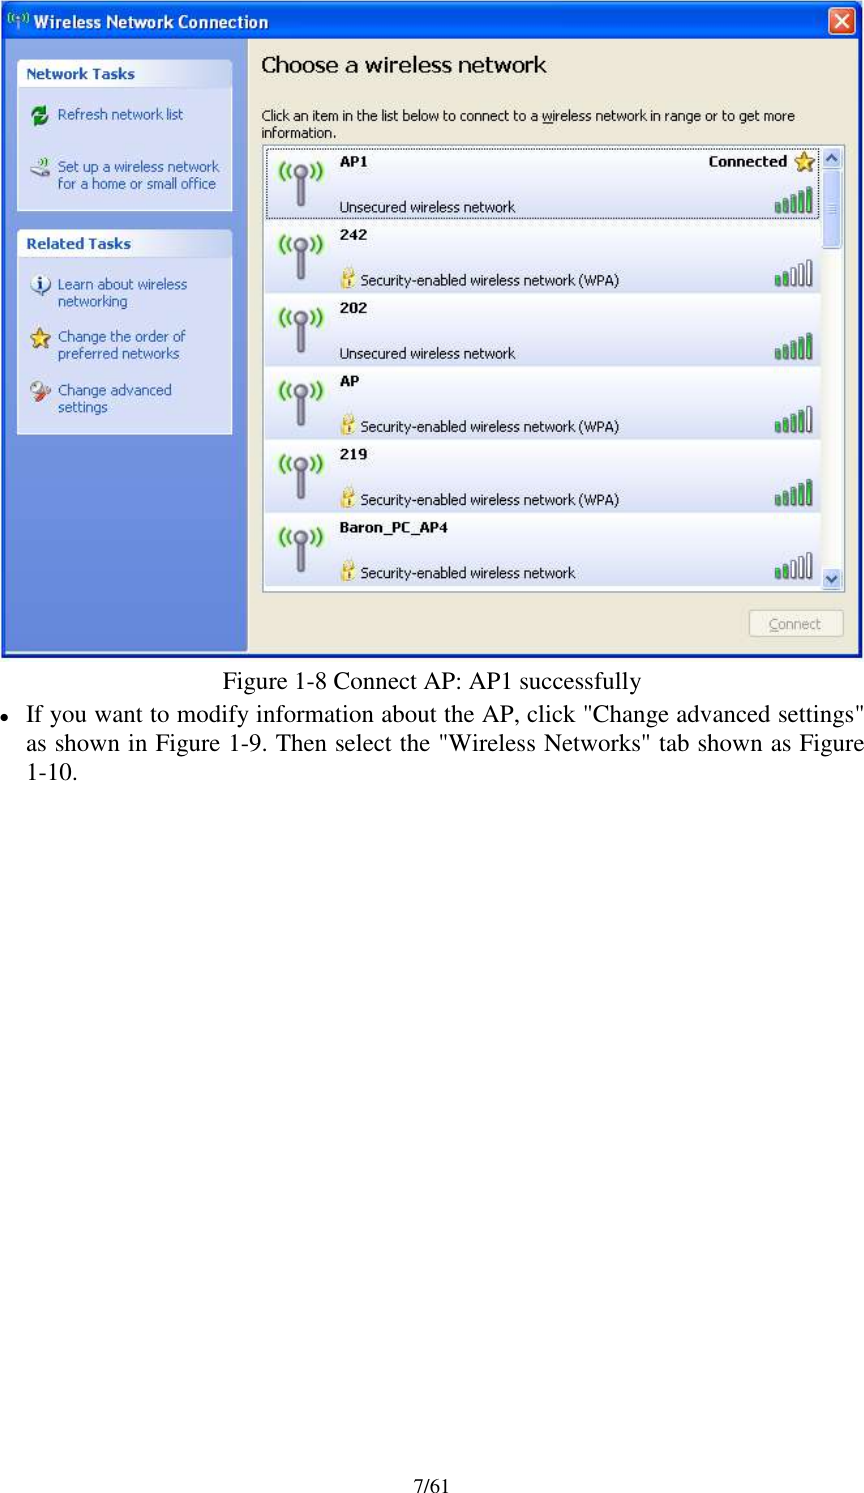 7/61Figure 1-8 Connect AP: AP1 successfullyIf you want to modify information about the AP, click &quot;Change advanced settings&quot;as shown in Figure 1-9. Then select the &quot;Wireless Networks&quot; tab shown as Figure1-10.